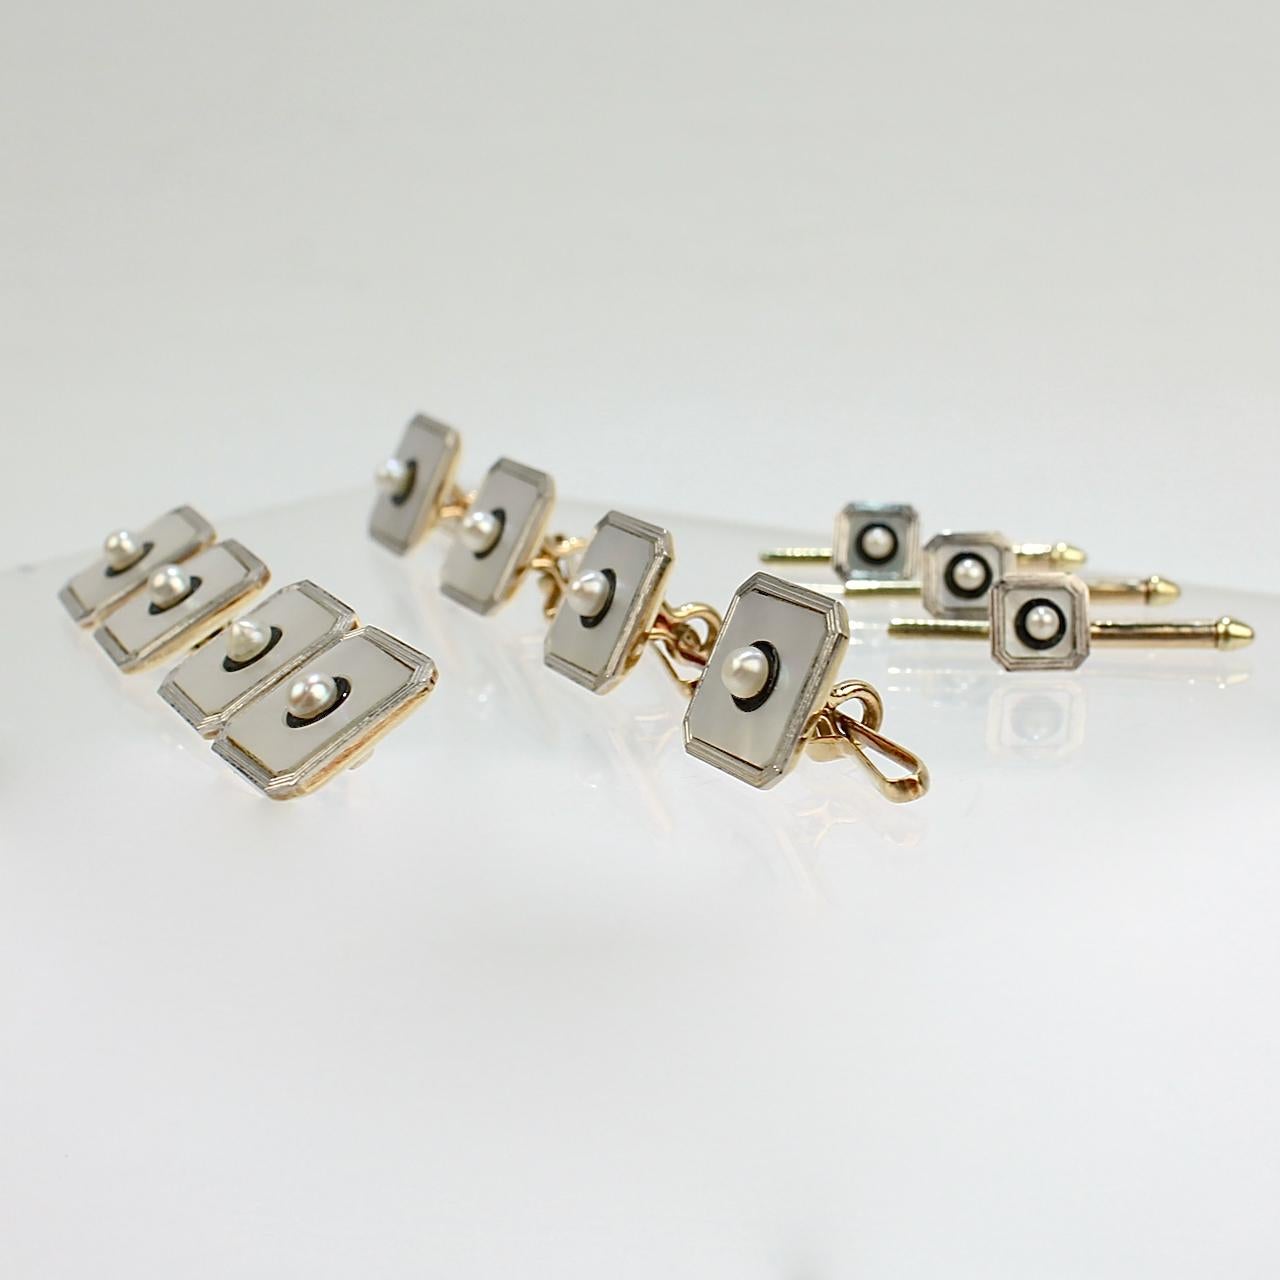 Men's Tiffany & Co Art Deco Cufflink Dress Set in 14K Gold & Platinum with Seed Pearls